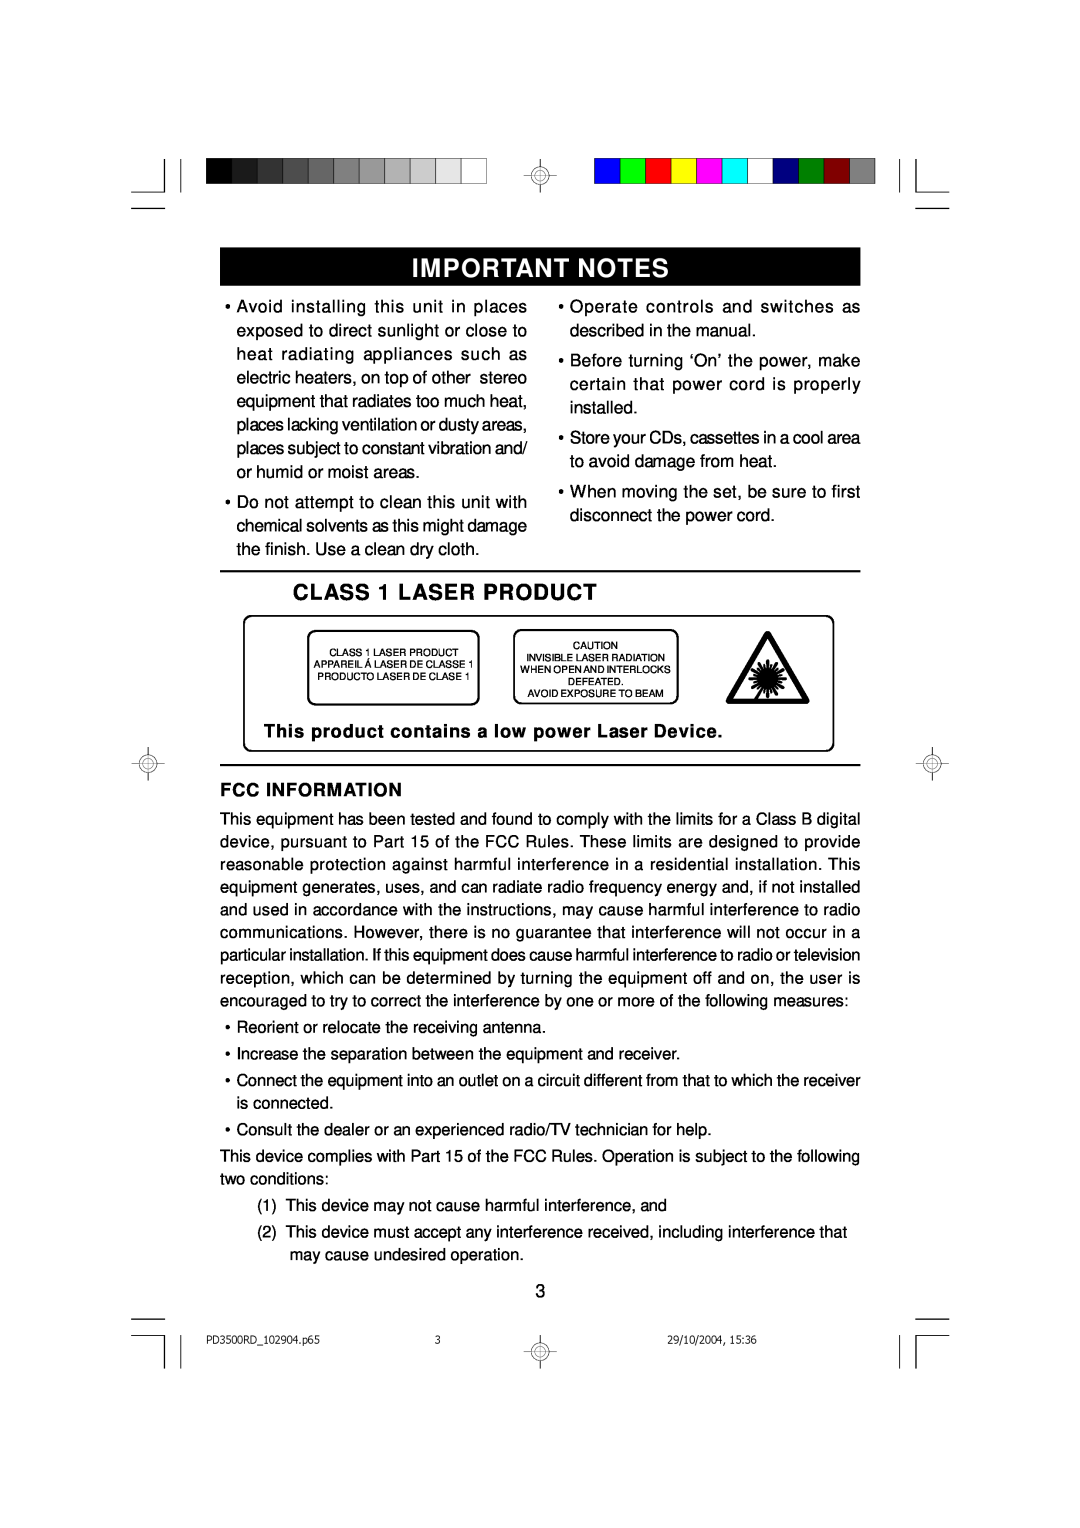 Emerson PD3500RD owner manual Important Notes, CLASS 1 LASER PRODUCT 